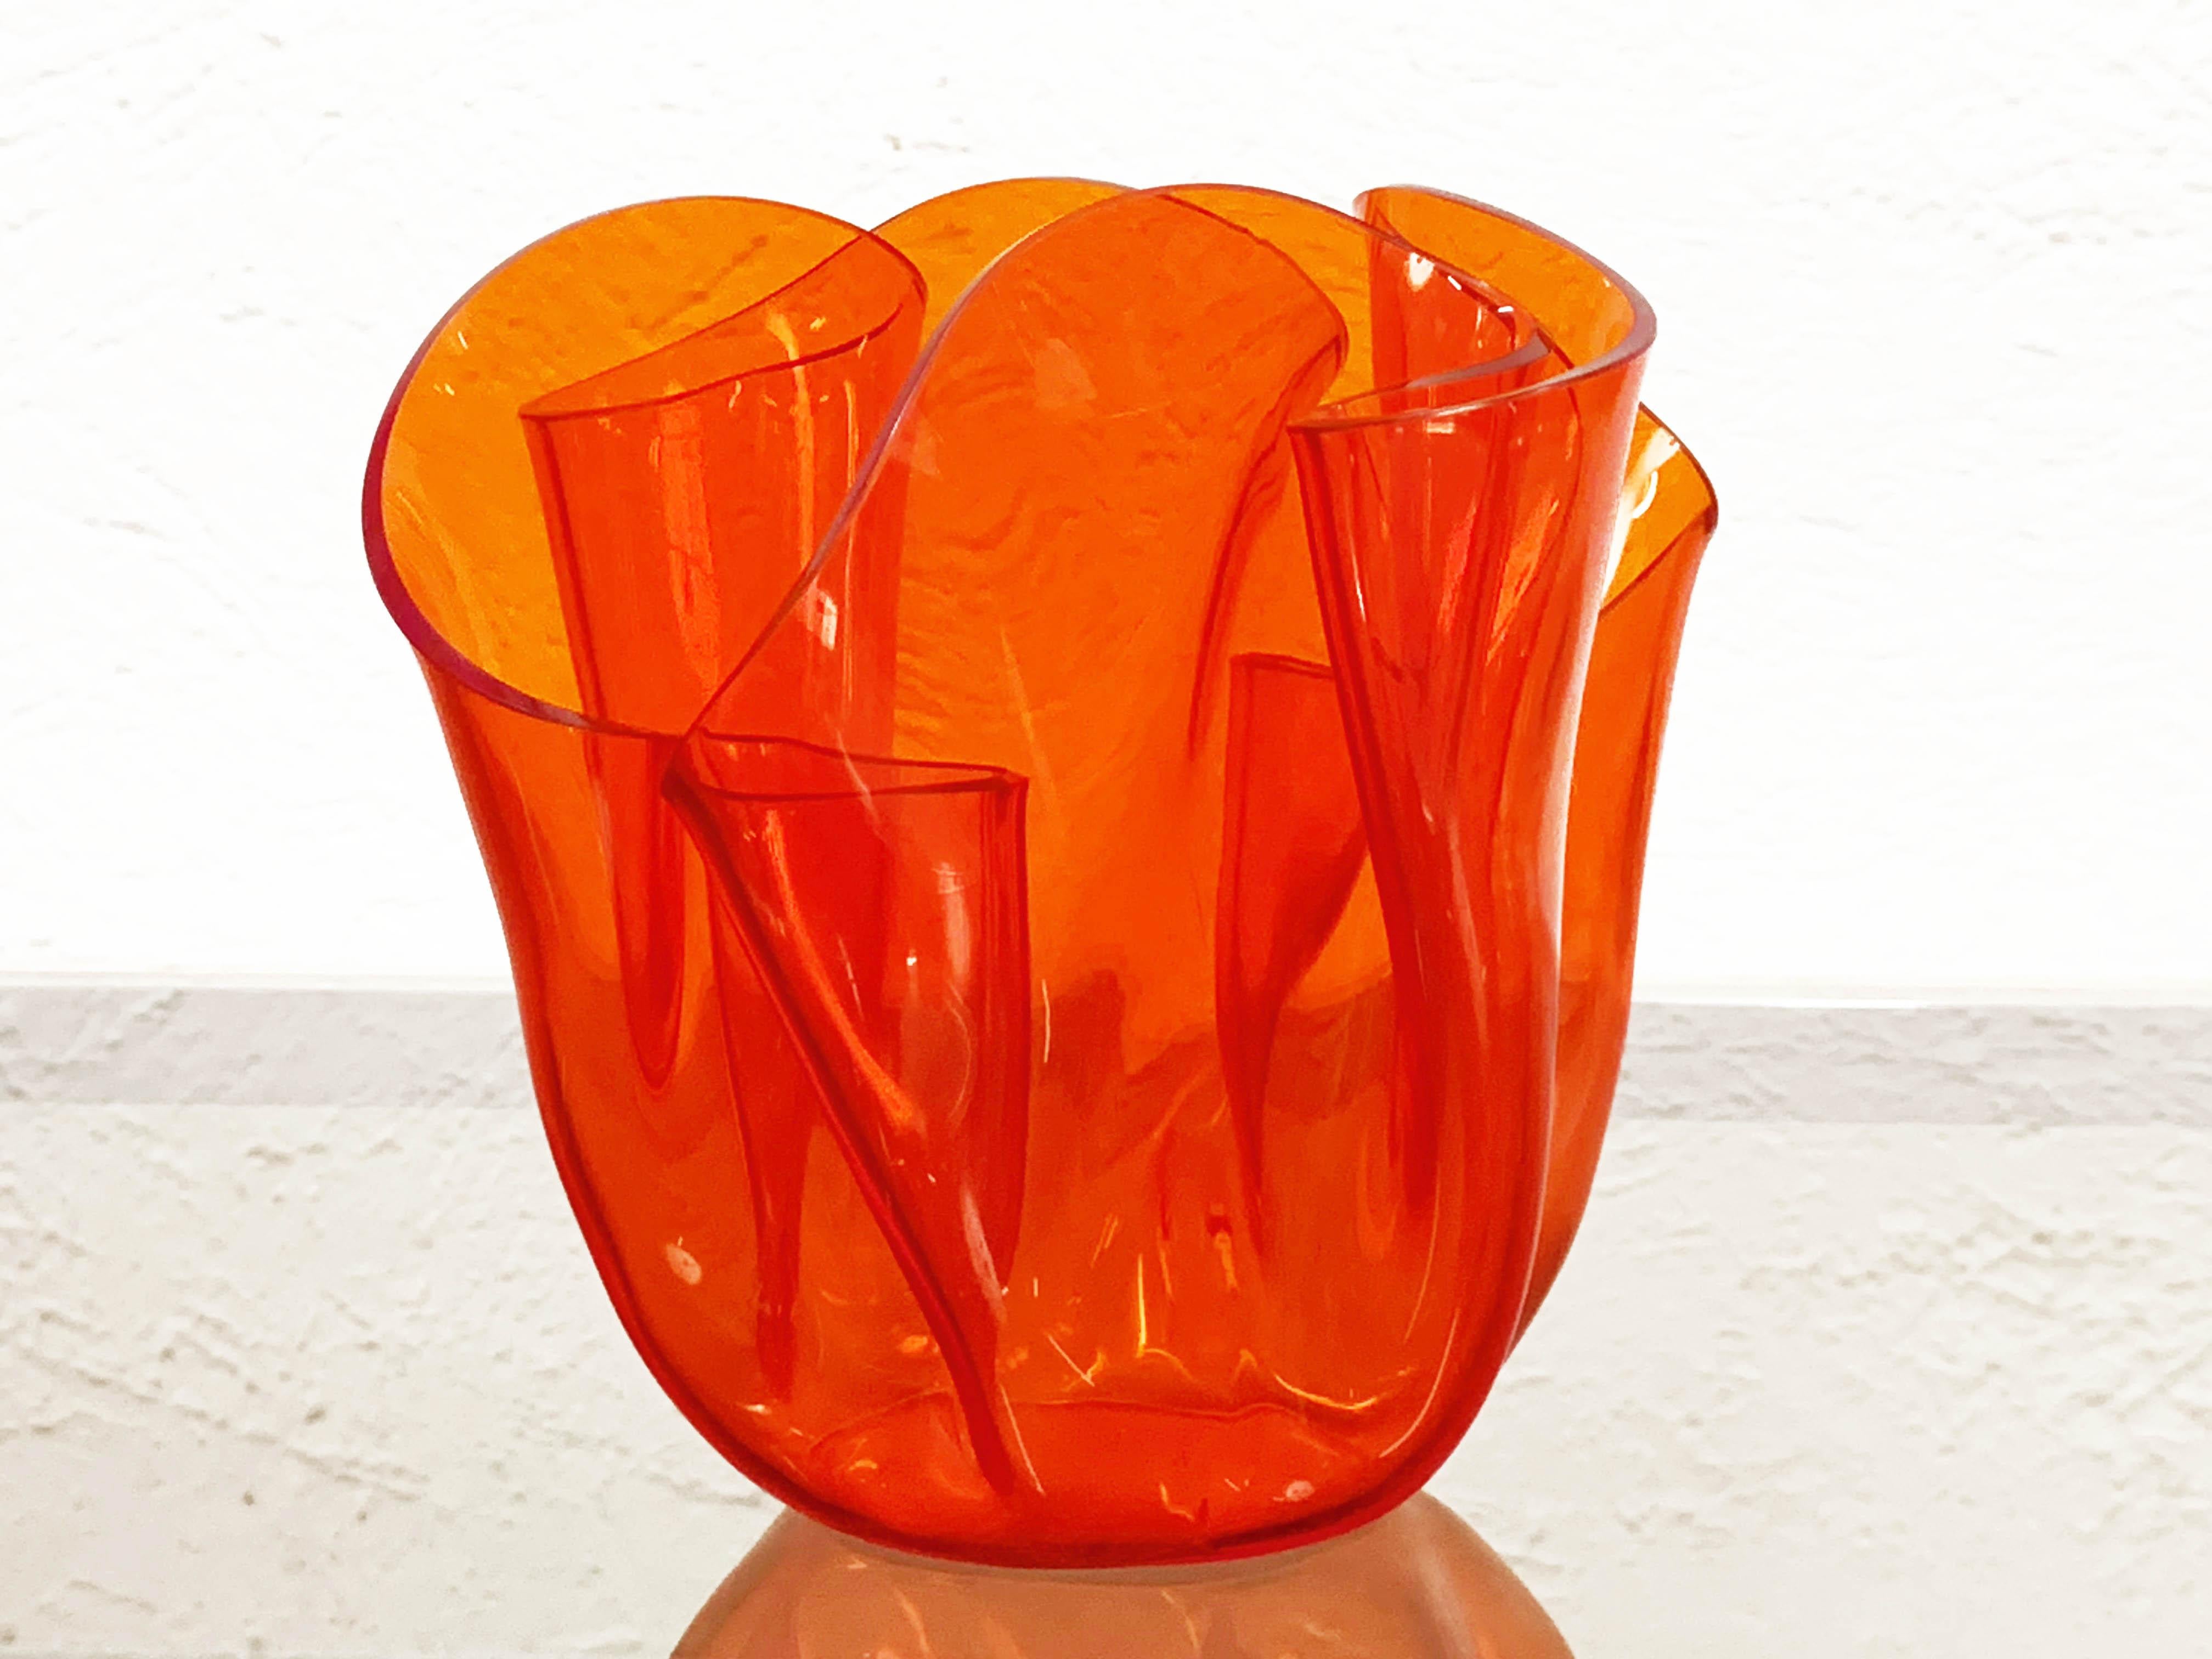 Unique Guzzini Italian production in Lucite and plexiglass with original orange shade.

This midcentury centerpiece has an incredible napkin design, that is typical of Italian production during the 1970s.

 